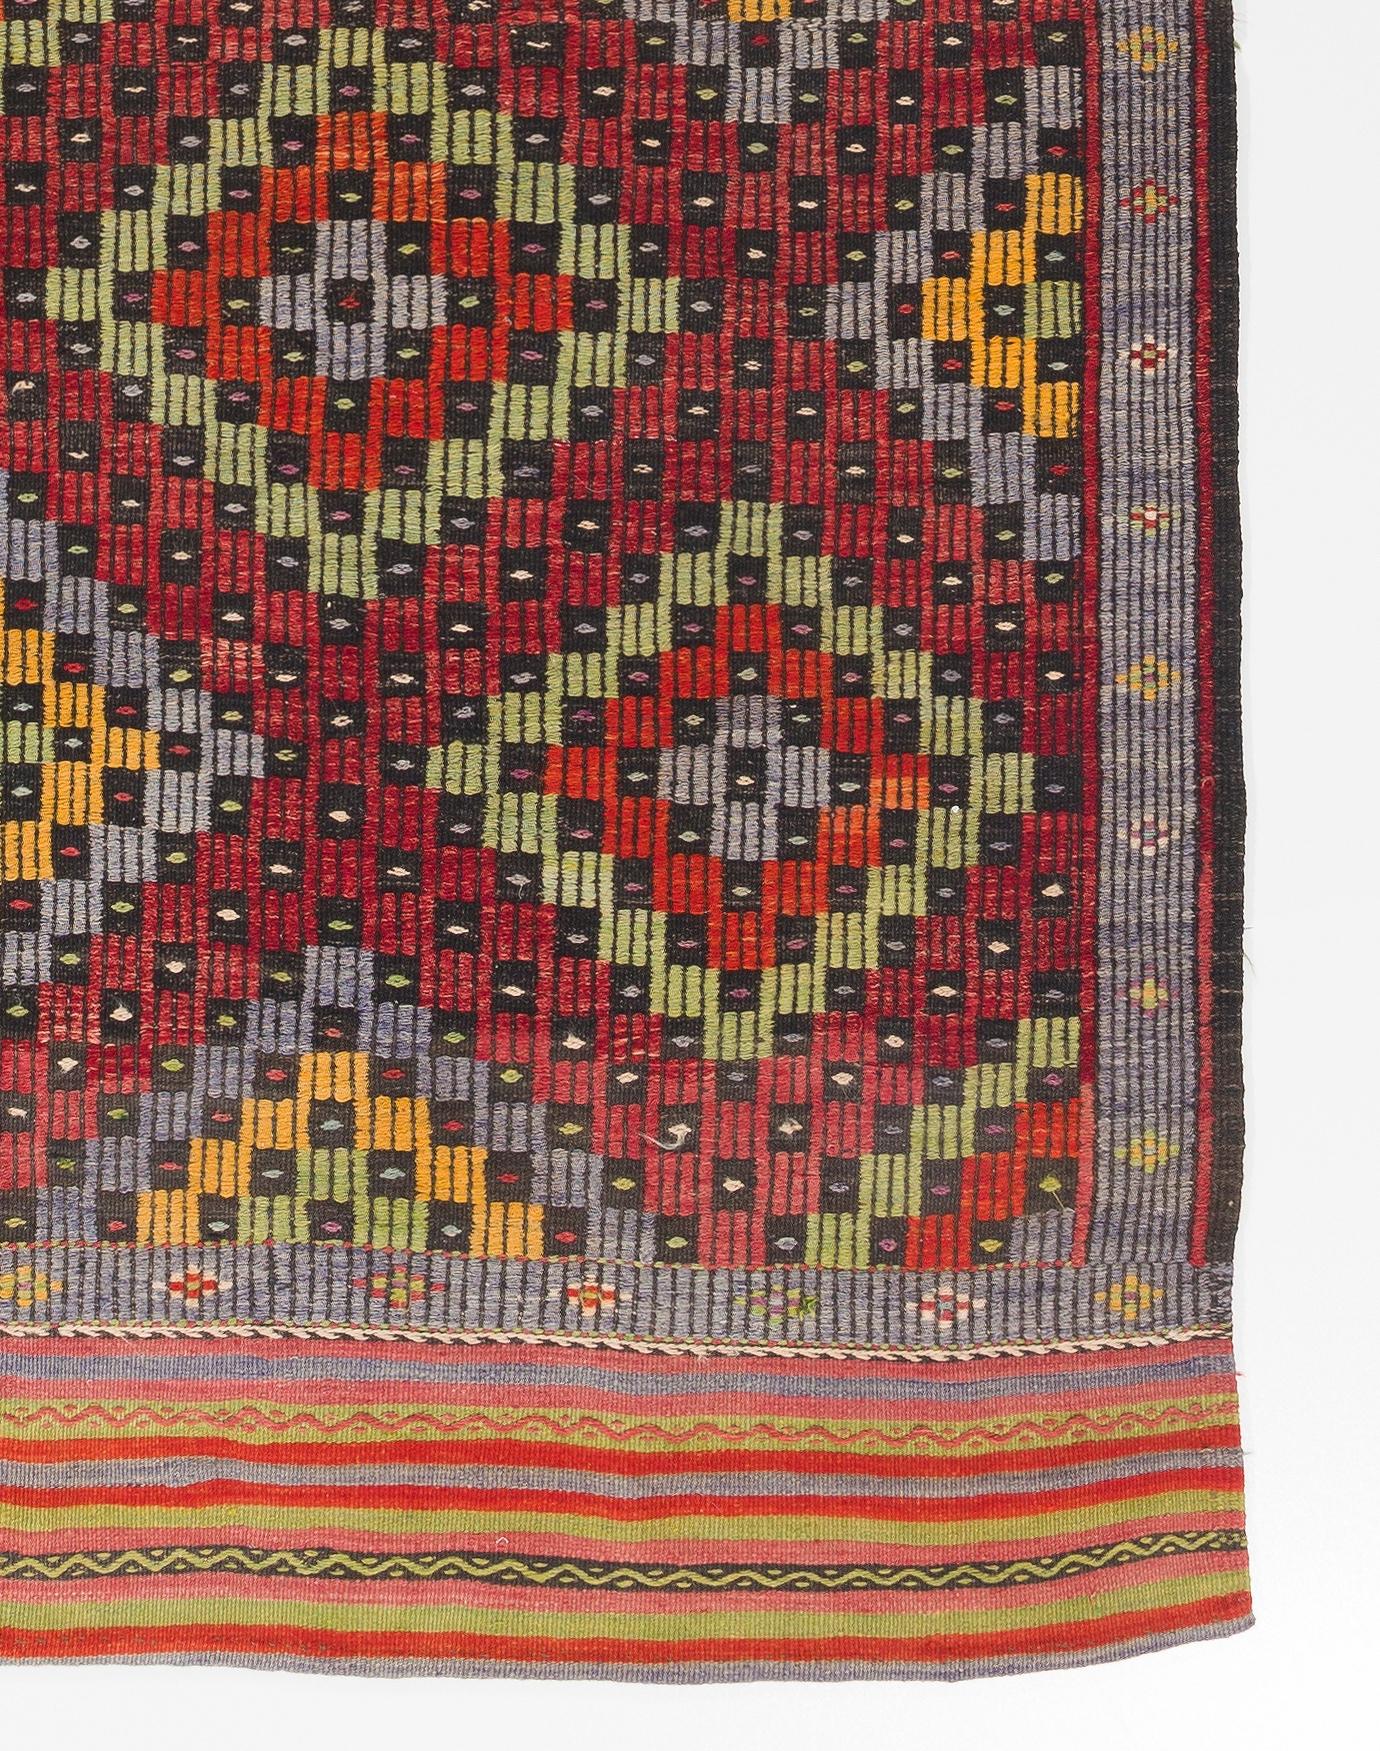 5.8x11 Ft Anatolian Jijim Kilim with Checkered Diamonds Design, Colorful Rug In Good Condition For Sale In Philadelphia, PA